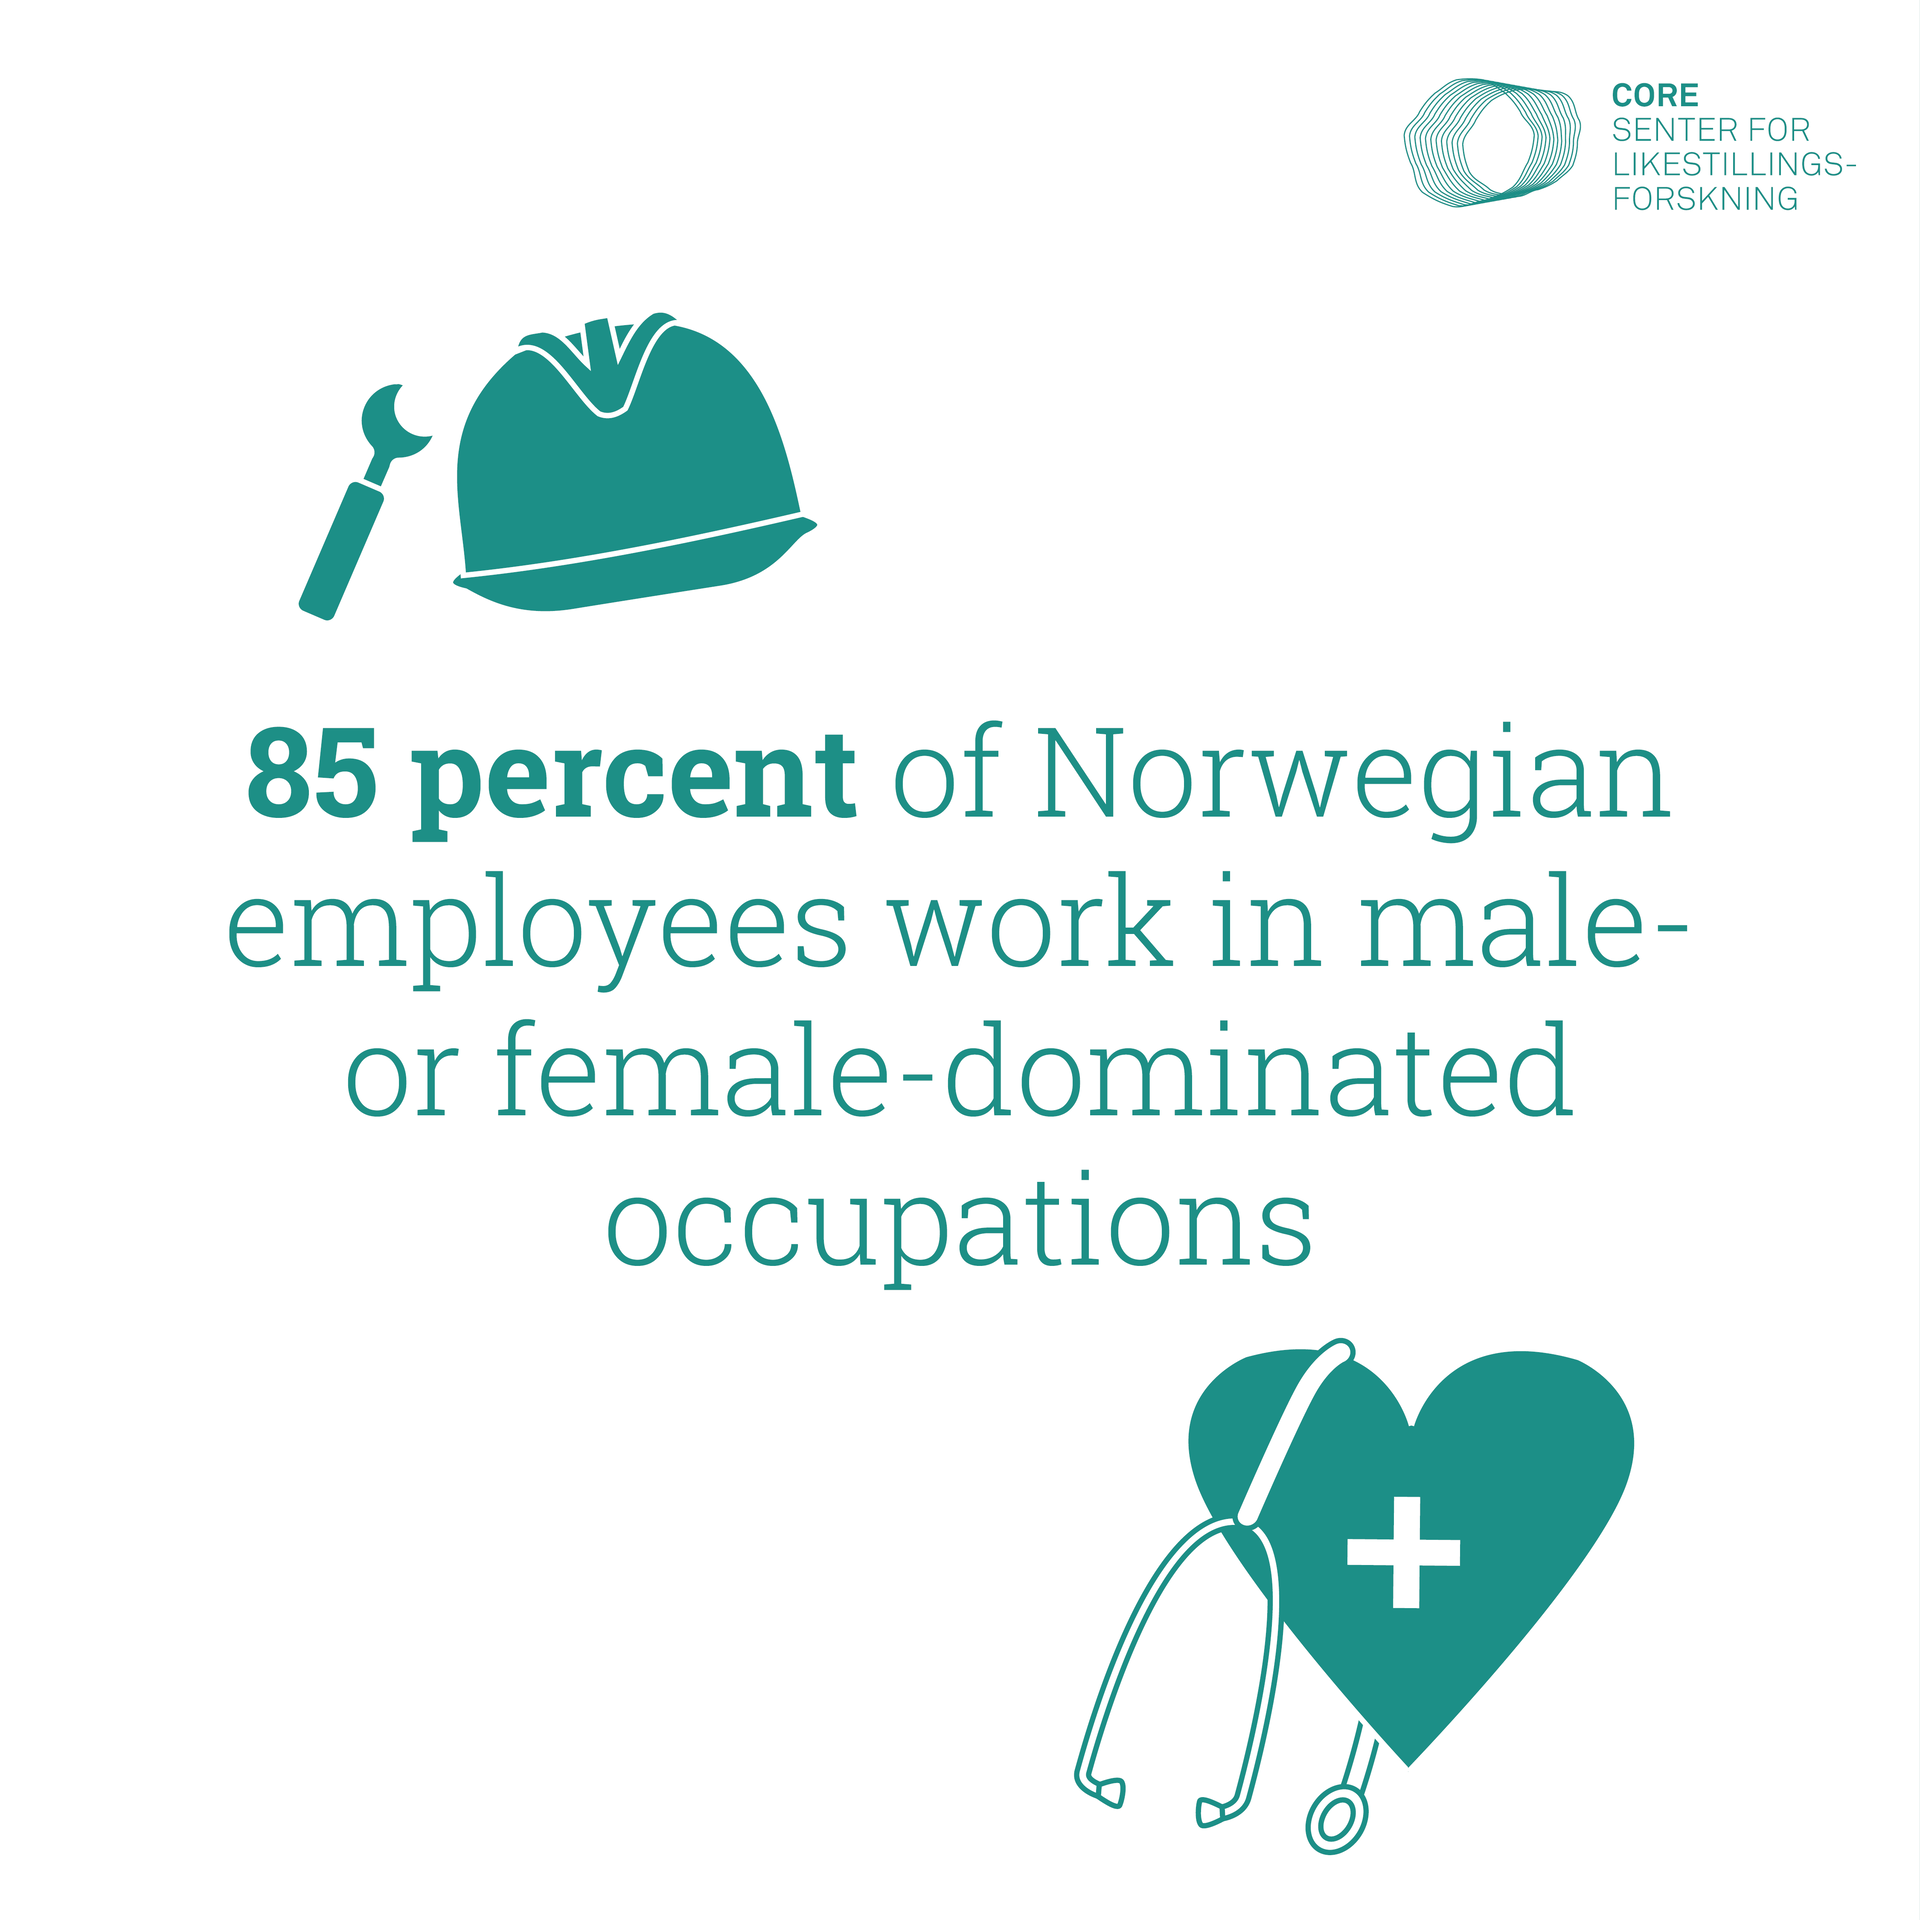 Many people work in male- or female-dominated occupations